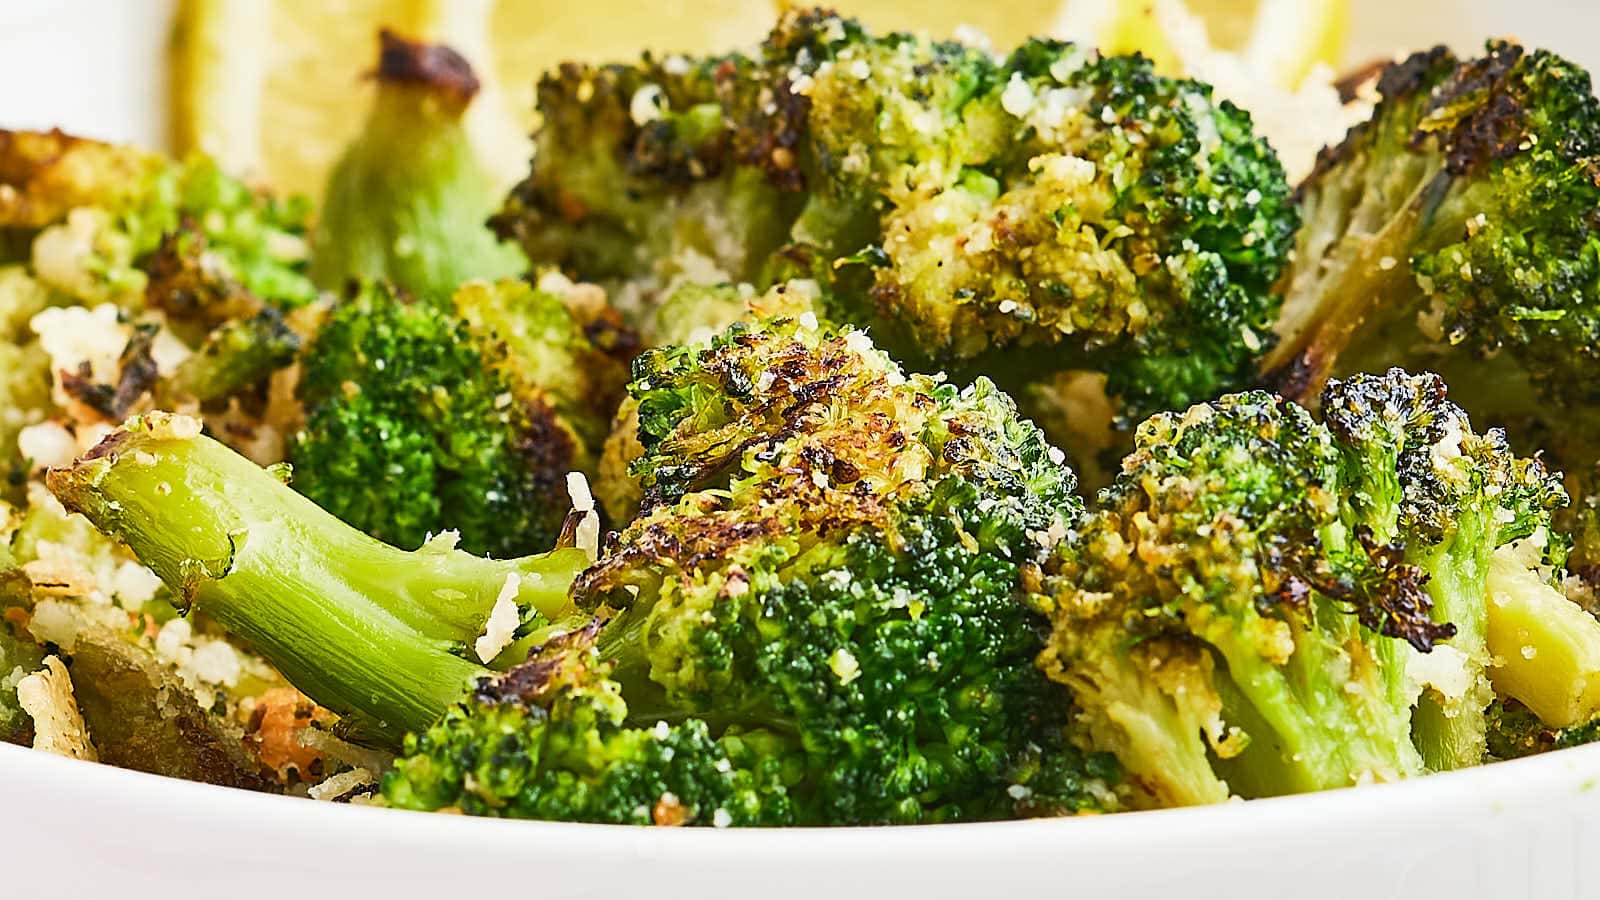 Roasted Frozen Broccoli recipe by Cheerful Cook.